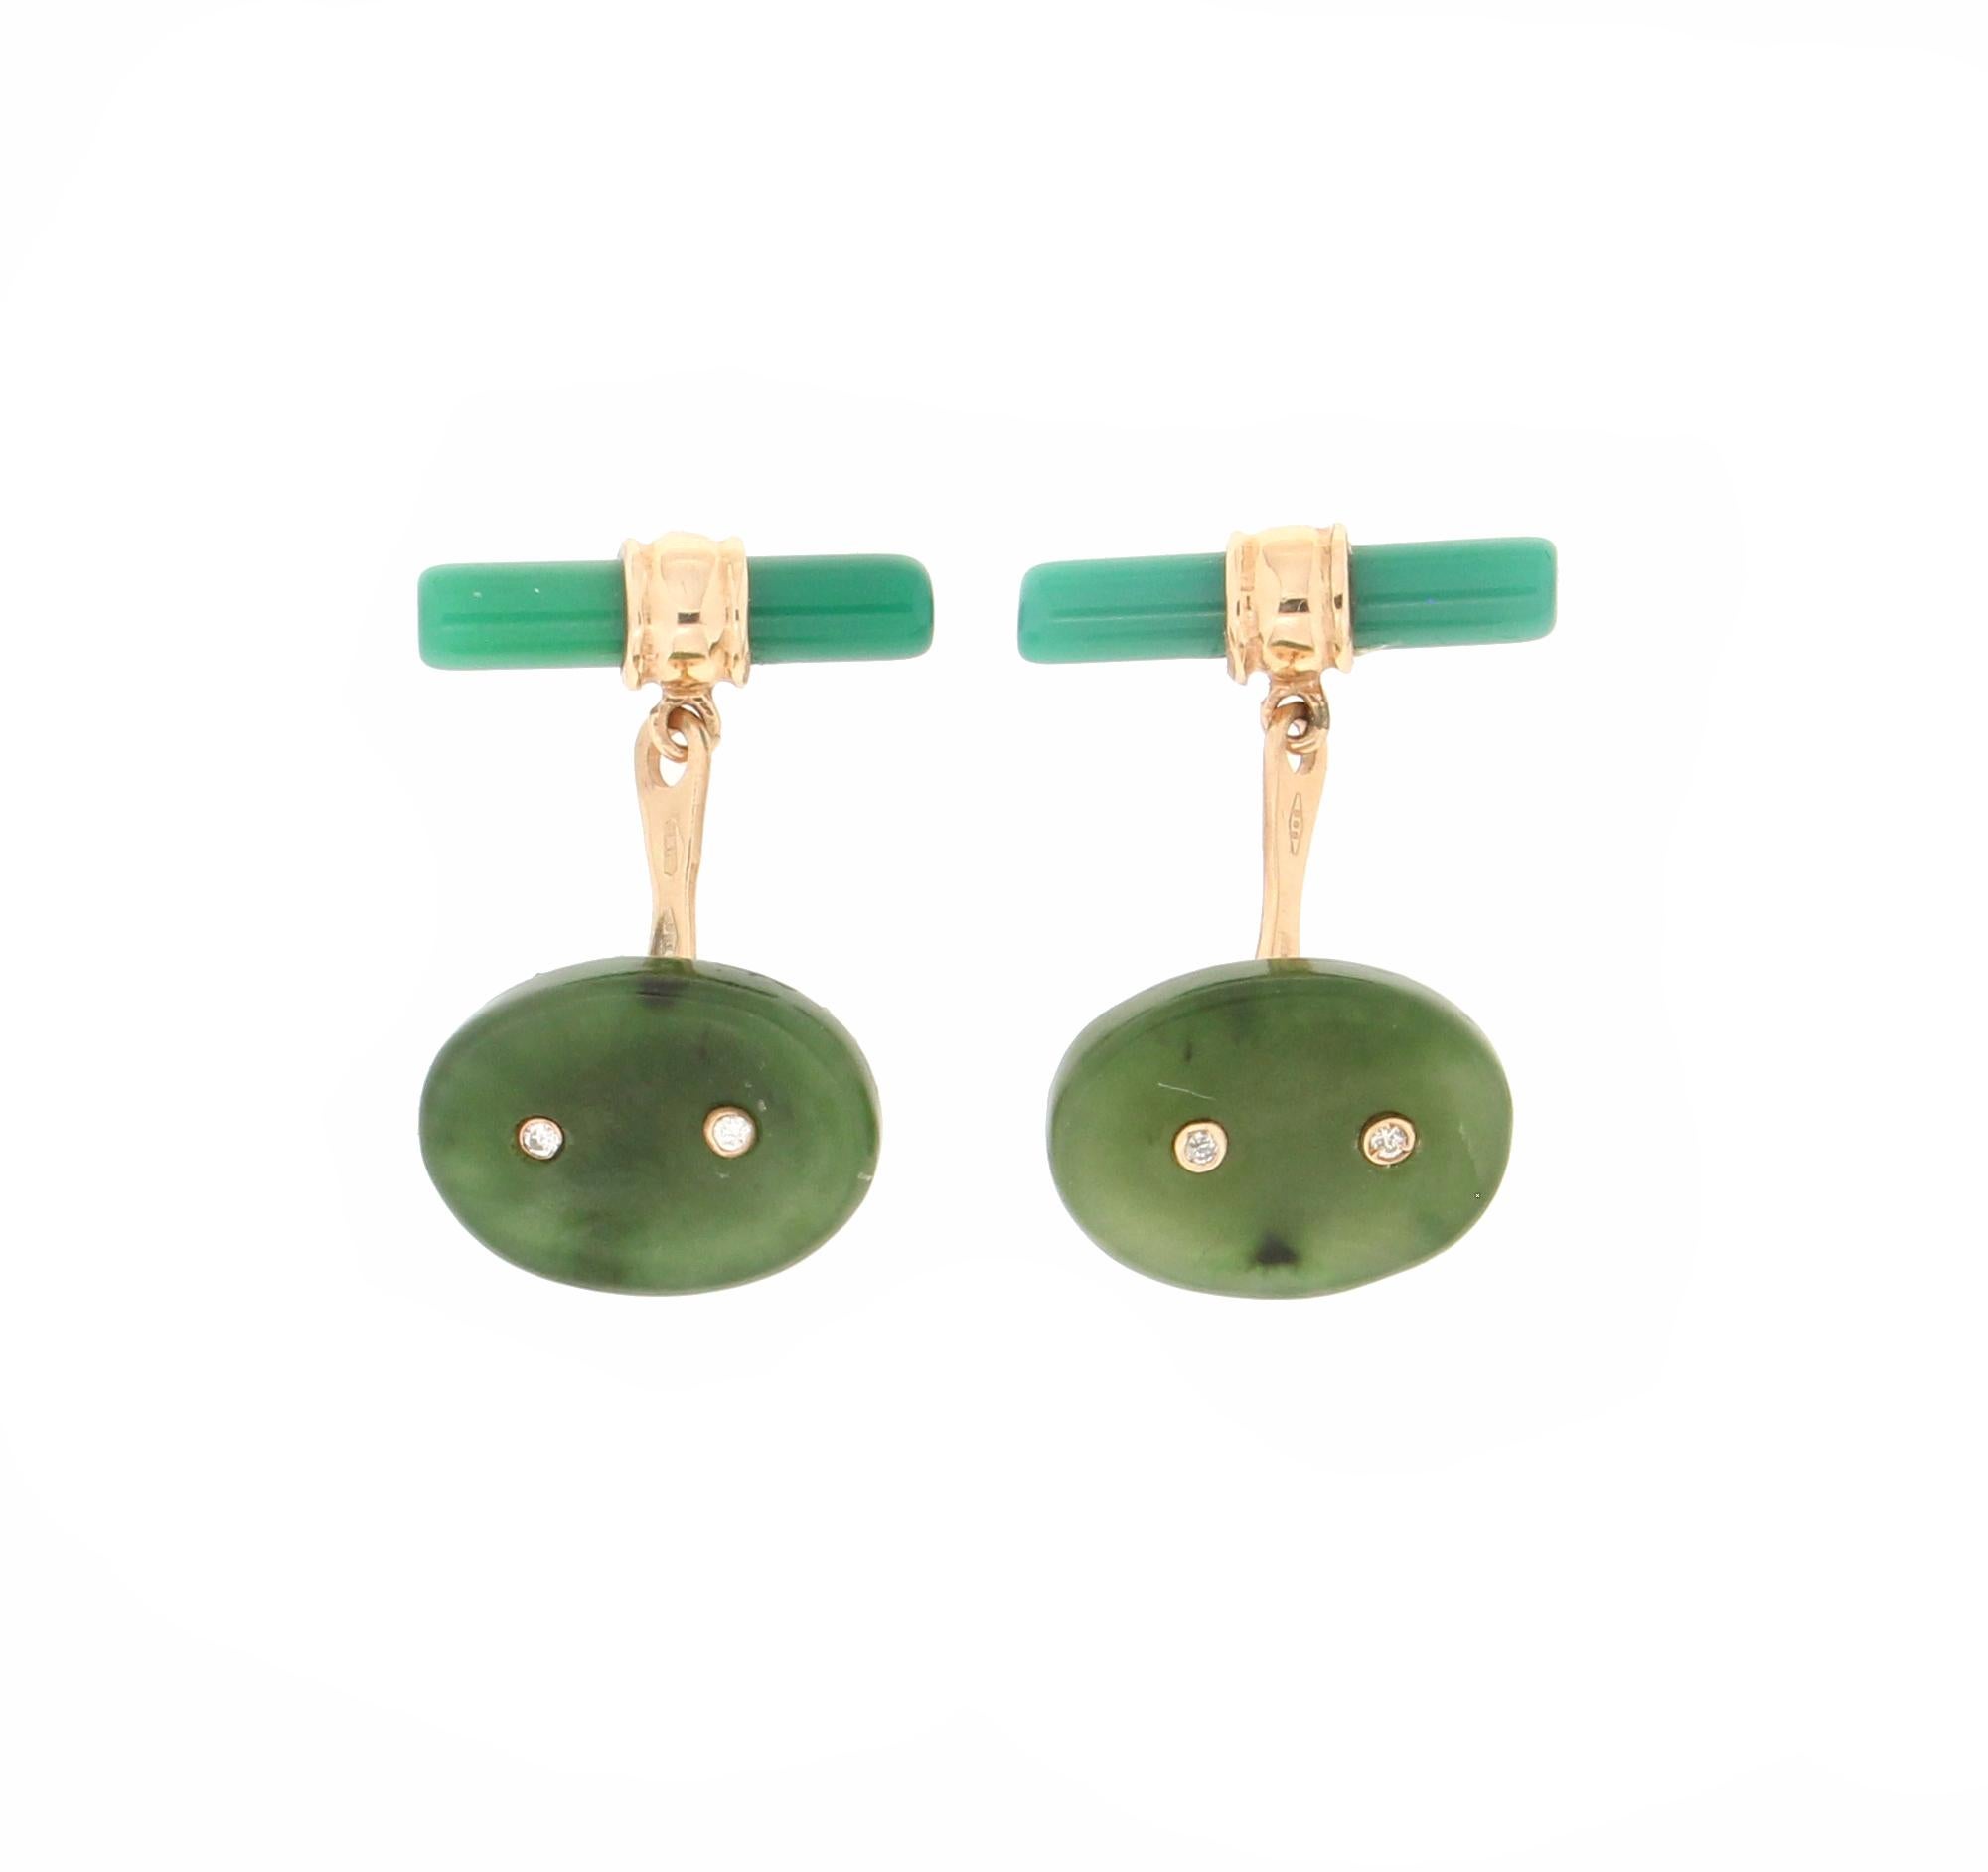 14 Karat yellow gold cufflinks. Handmade by our craftsmen and assembled with green agate and diamonds

Cufflinks total weight 9.90 grams
Diamonds weight 0.04 karat